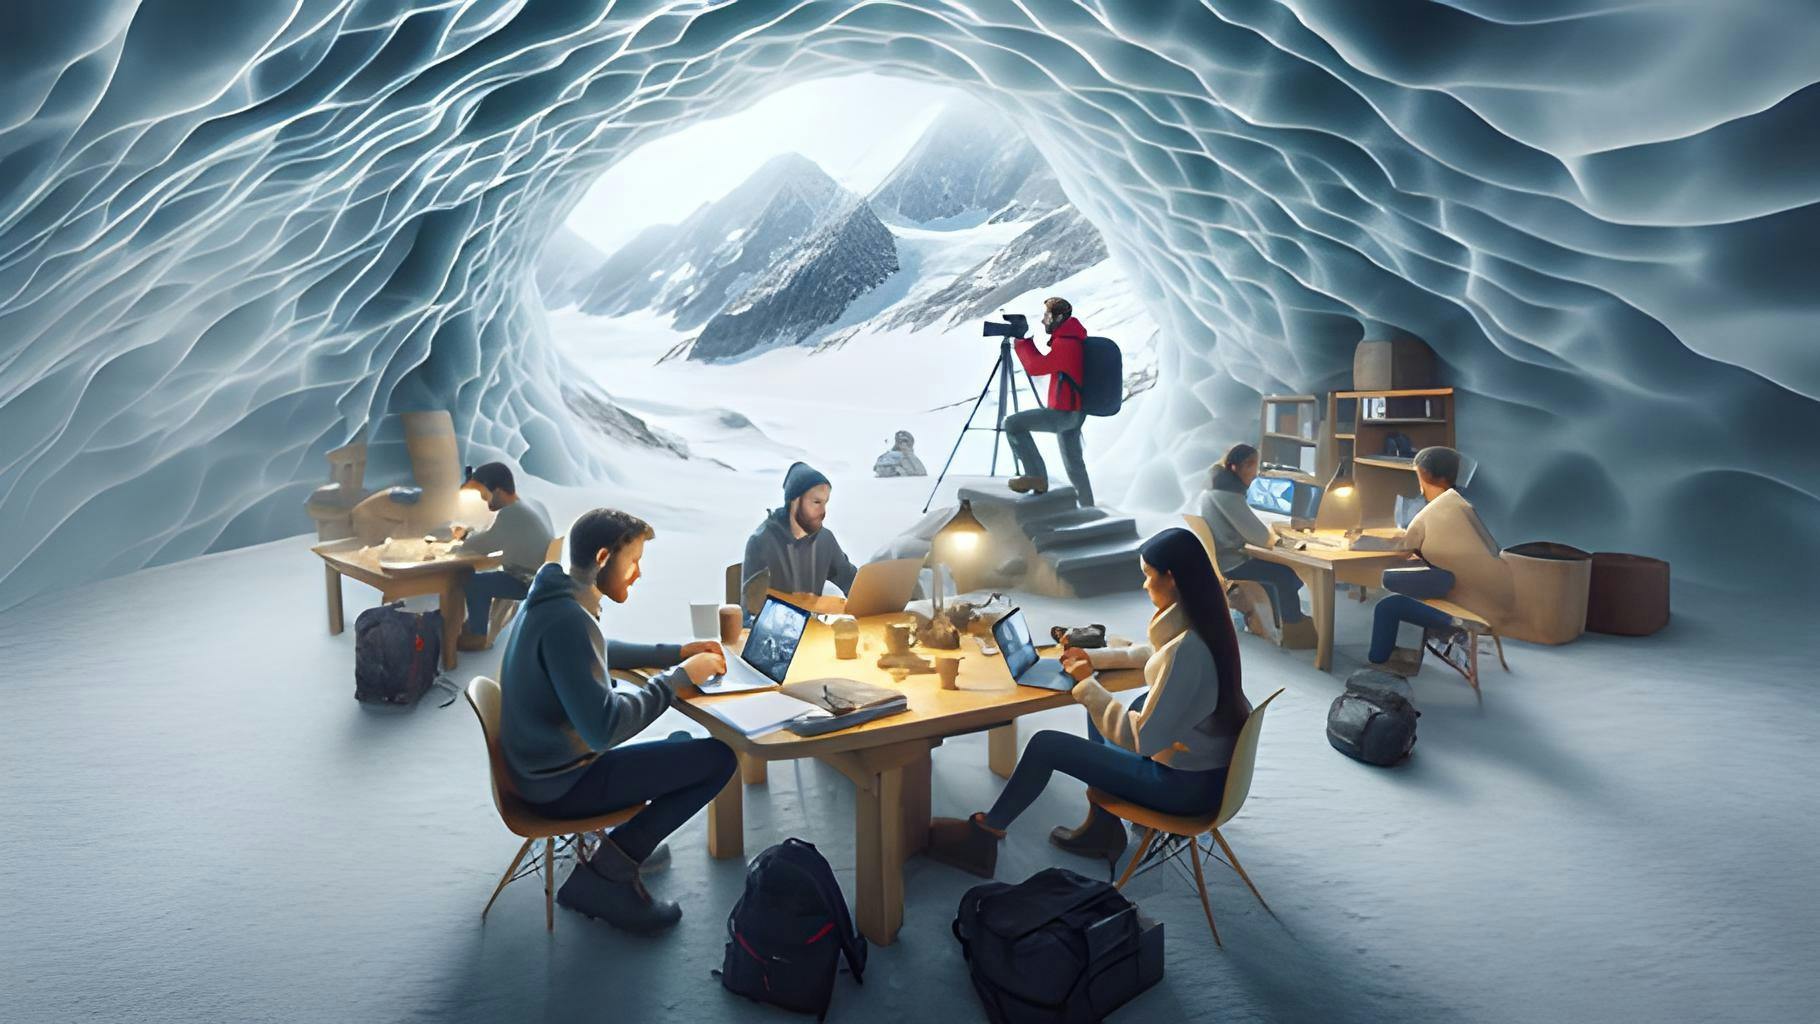 Cover Image for Coworking in the Ice